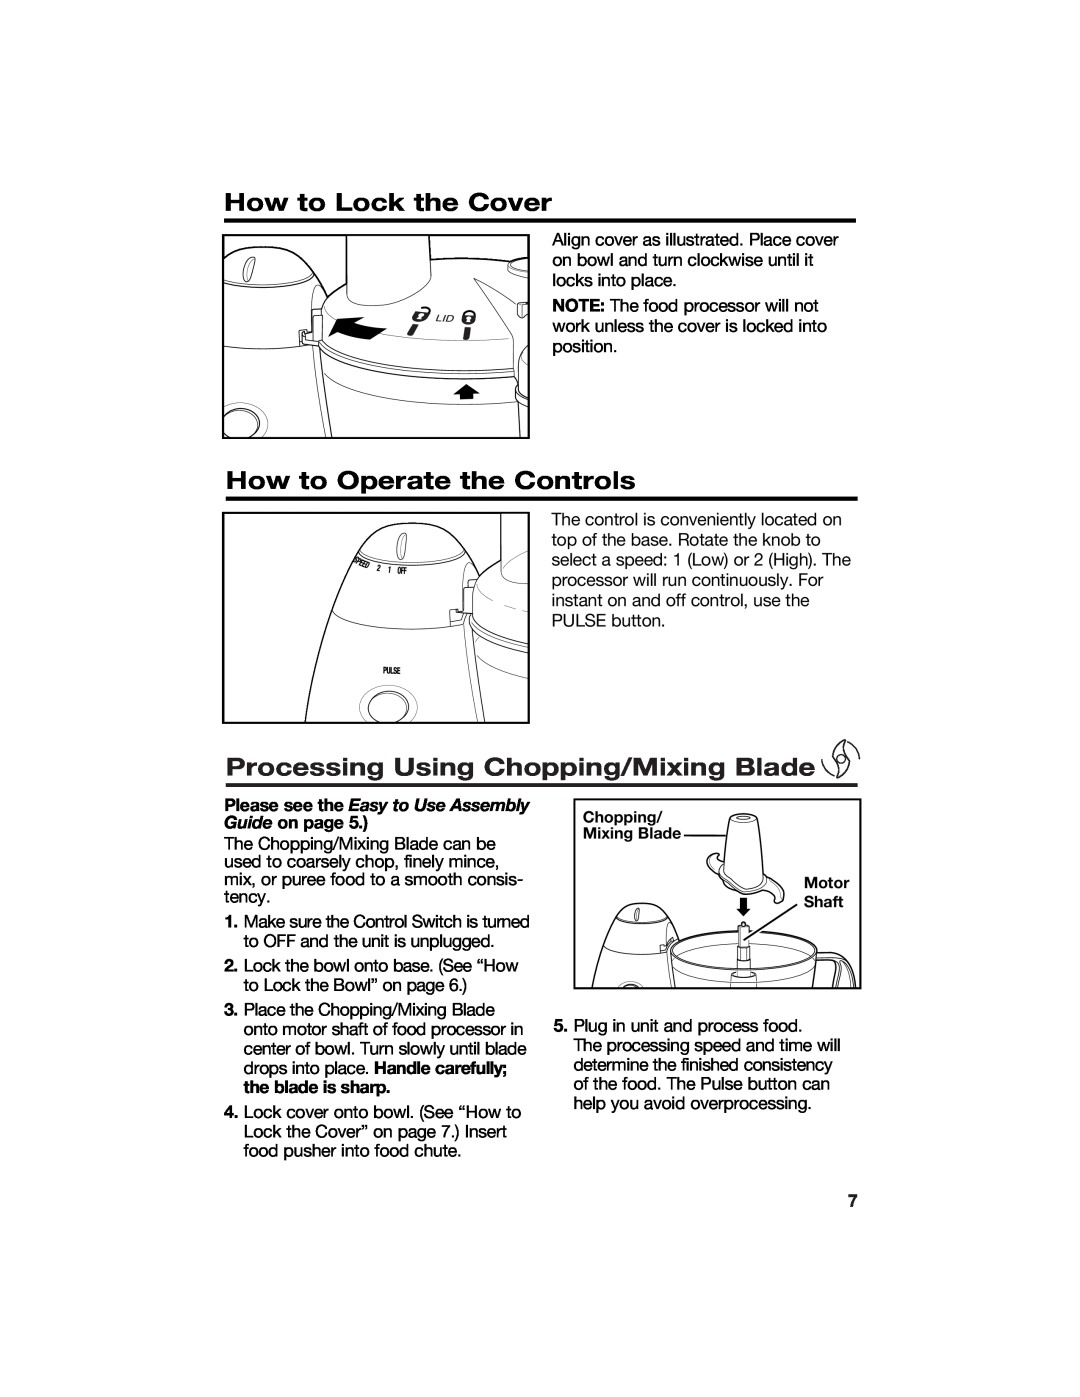 Hamilton Beach 840118100 manual How to Lock the Cover, How to Operate the Controls, Processing Using Chopping/Mixing Blade 